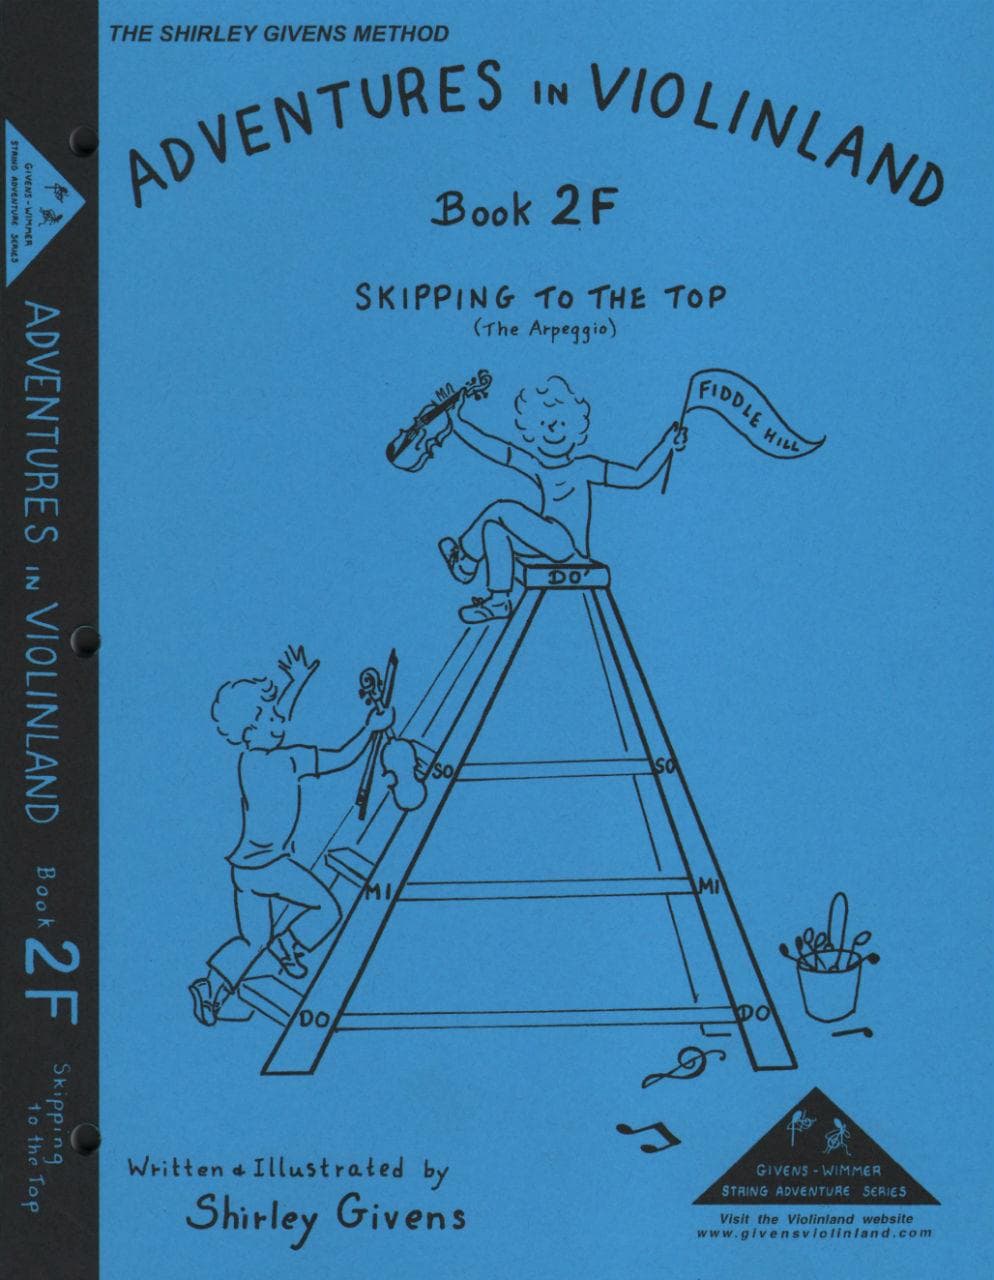 Givens, Shirley - Adventures in Violinland, Book 2F: "Skipping to the Top" - Arioso Press Publication